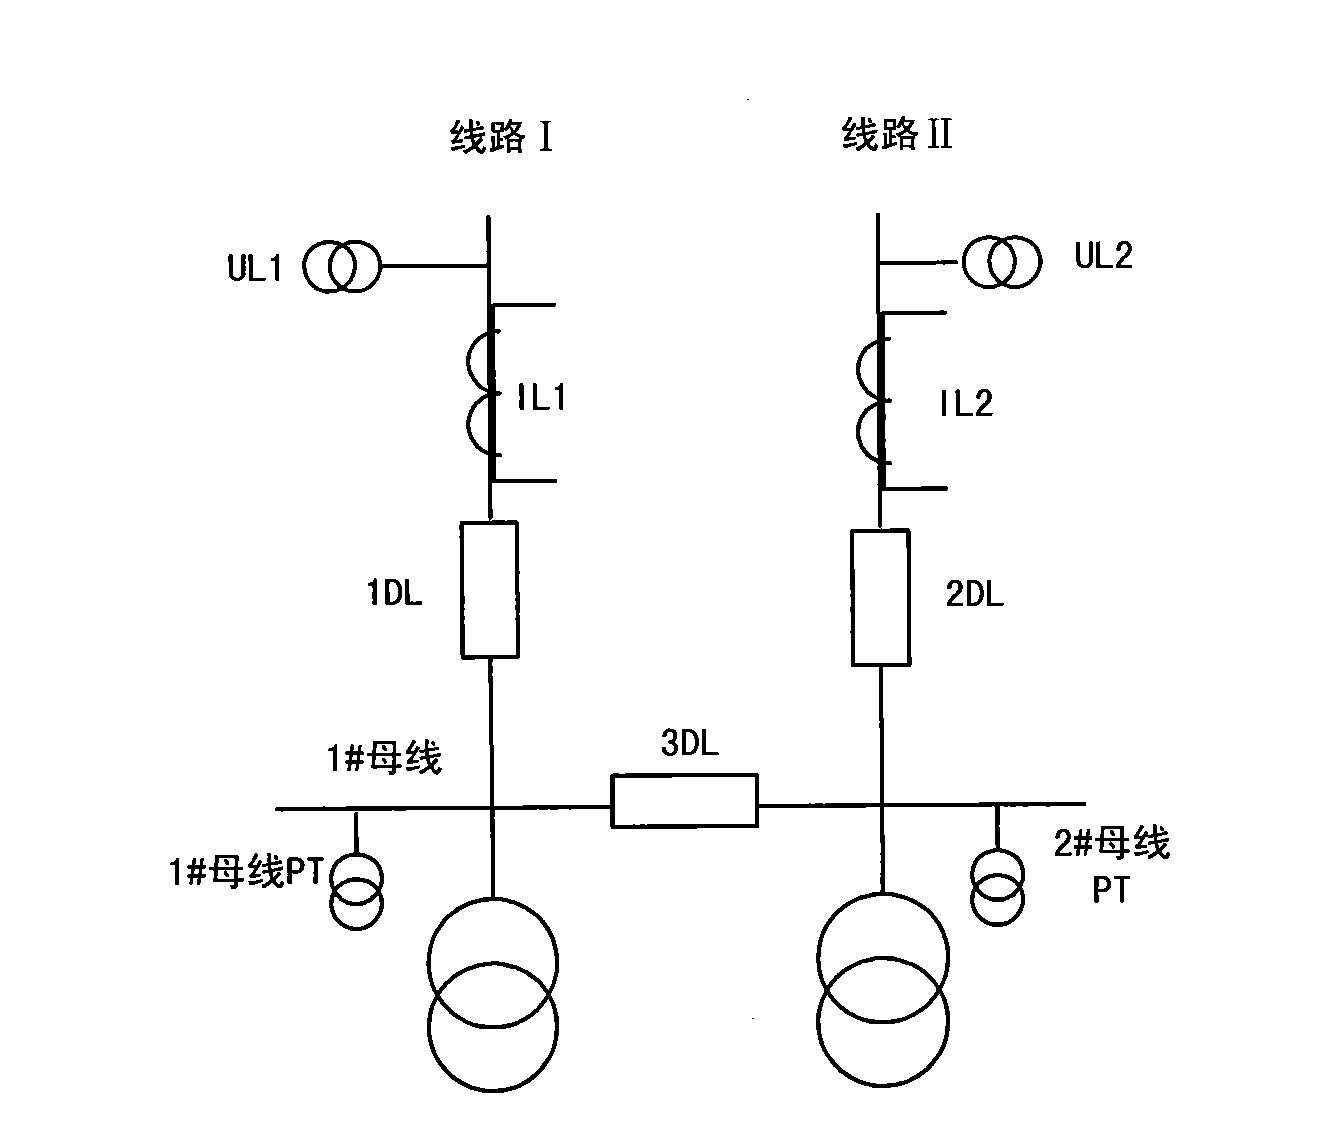 Spare power automatic switching programmable logic control method for plant supply of power station